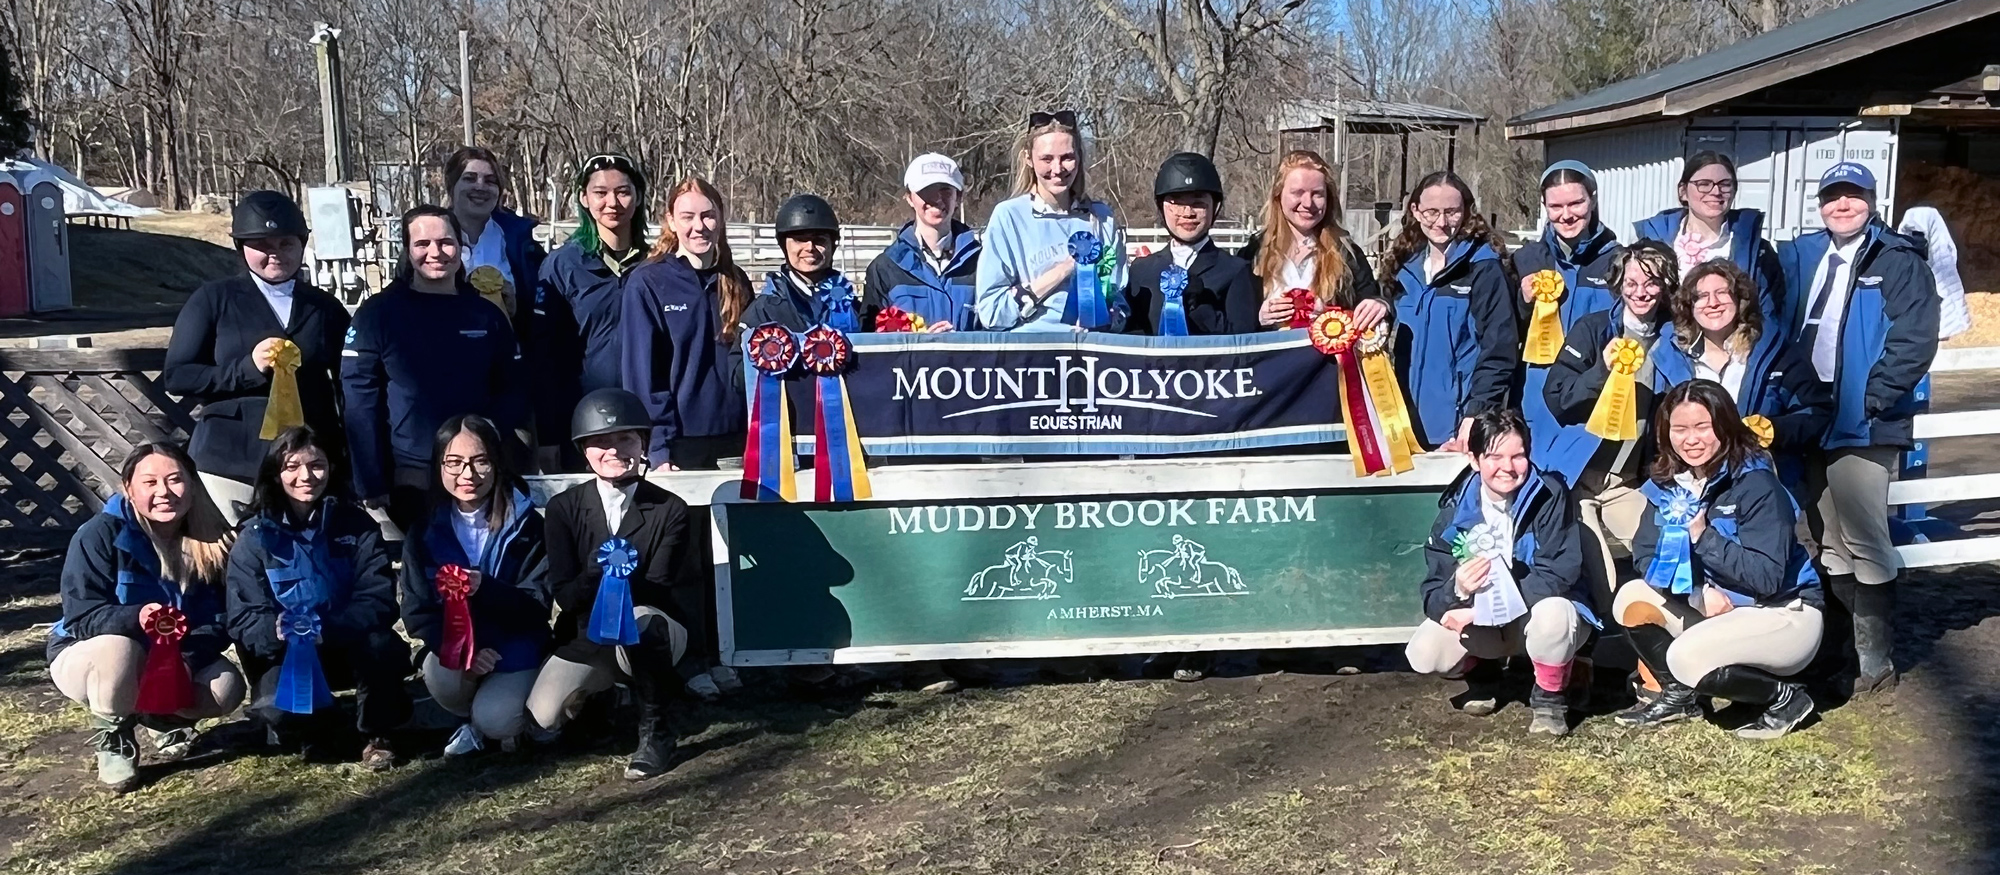 The Mount Holyoke College equestrian team took third place among eight teams at the UMass-Amherst Show held Sunday, March 3, 2024 at Muddy Brook Farm in Amherst.